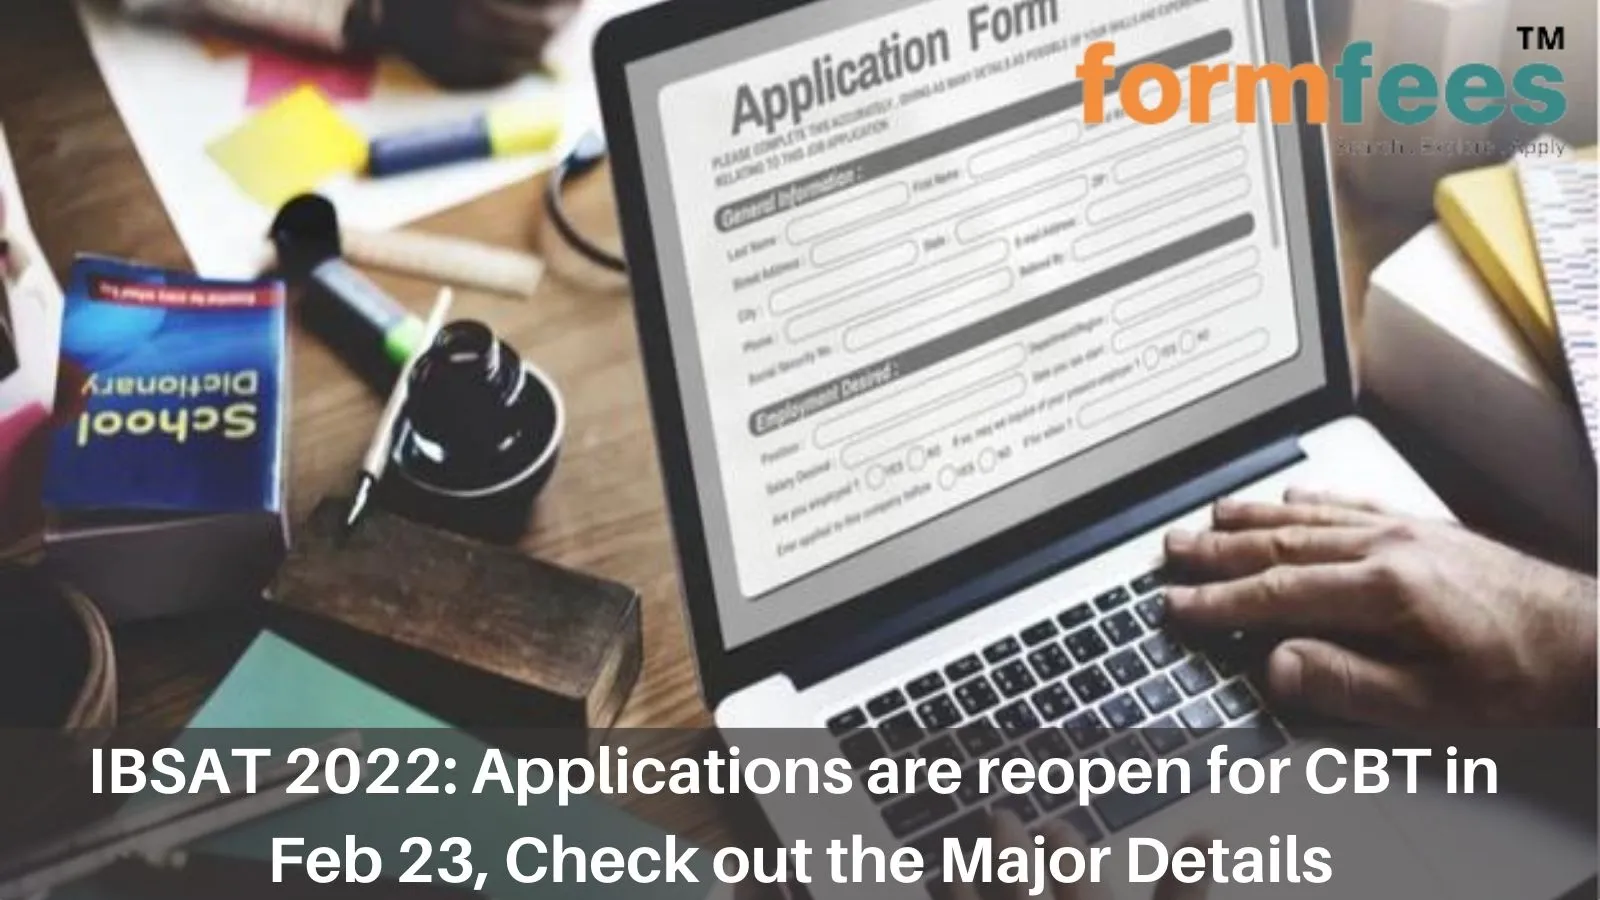 IBSAT 2022: Applications are reopen for CBT in Feb 23, Check out the Major Details